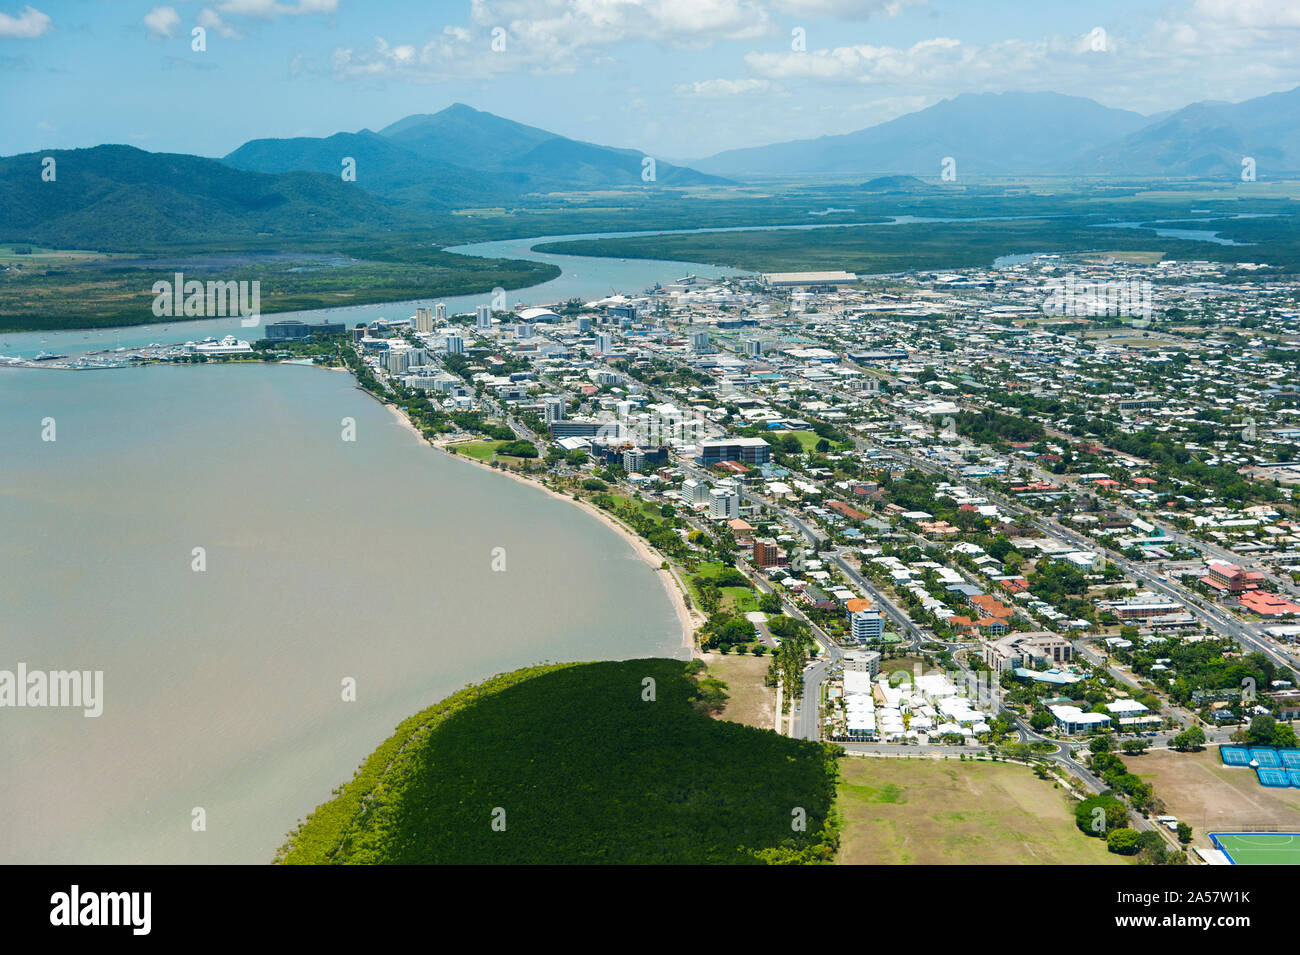 Aerial view of the city at waterfront, Cairns, Queensland, Australia Stock Photo